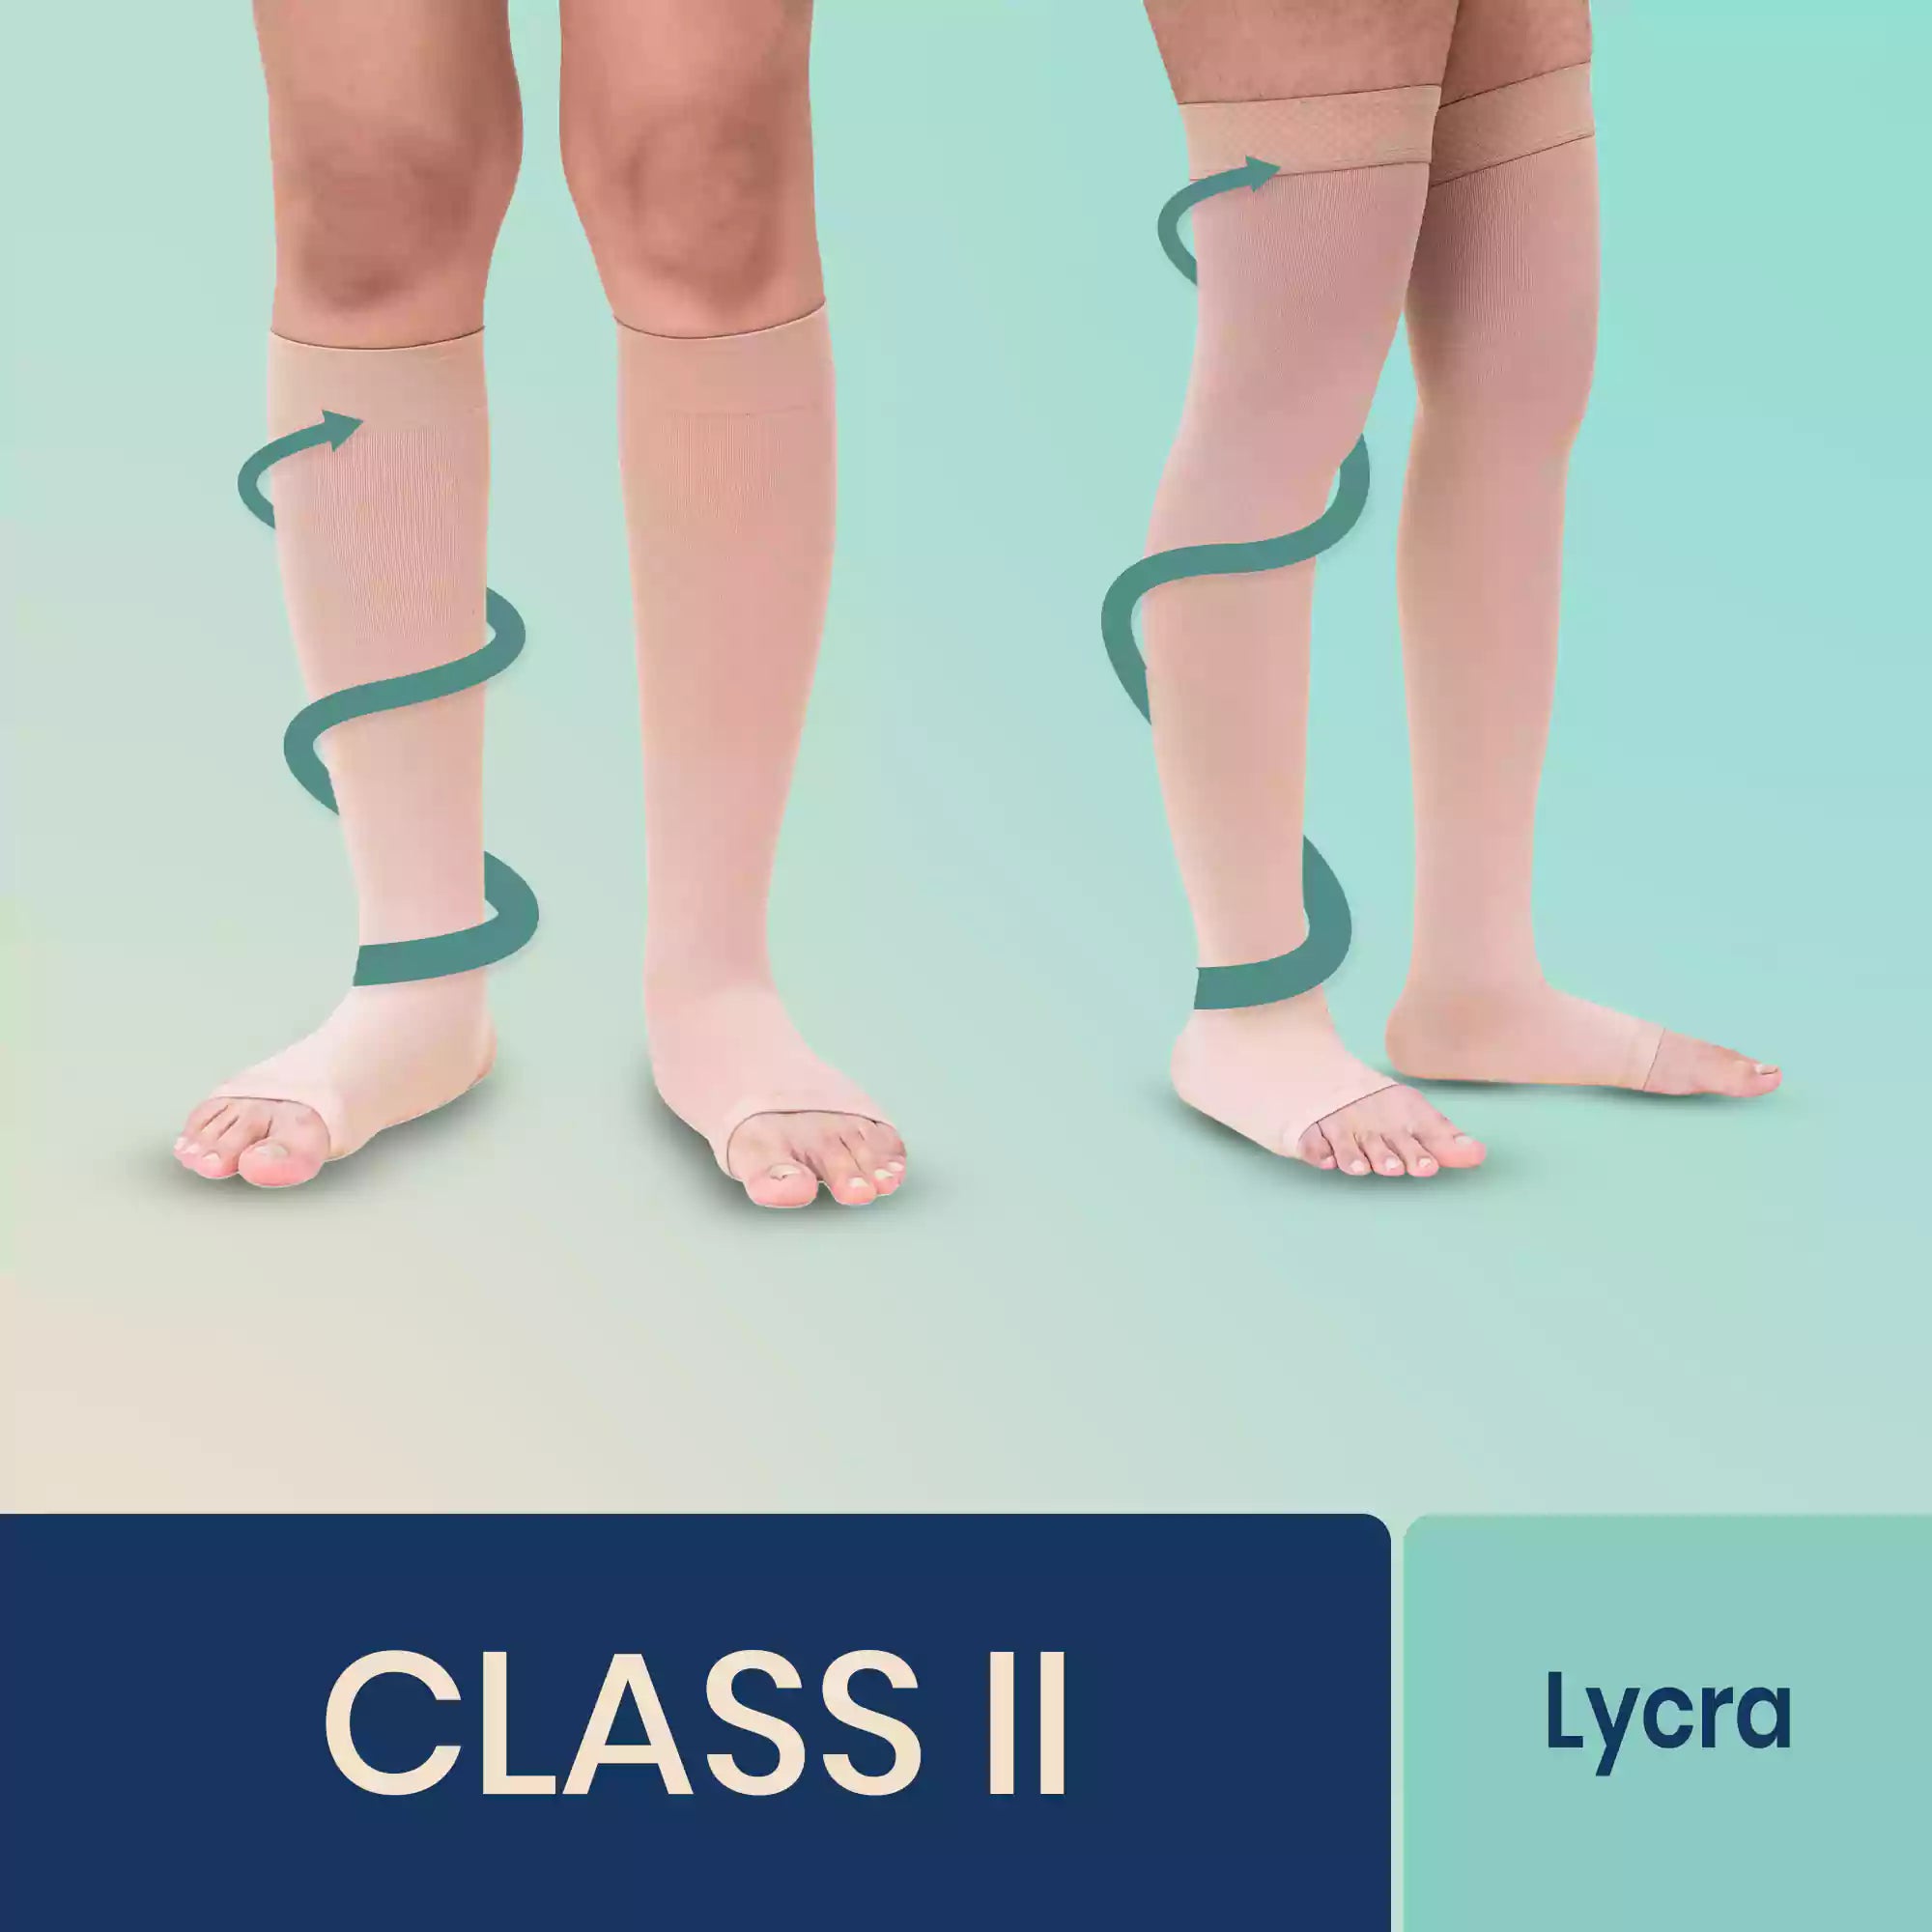 Sorgen Classique (Lycra) Compression Stockings For Varicose Veins Class 2  Thigh Length Large